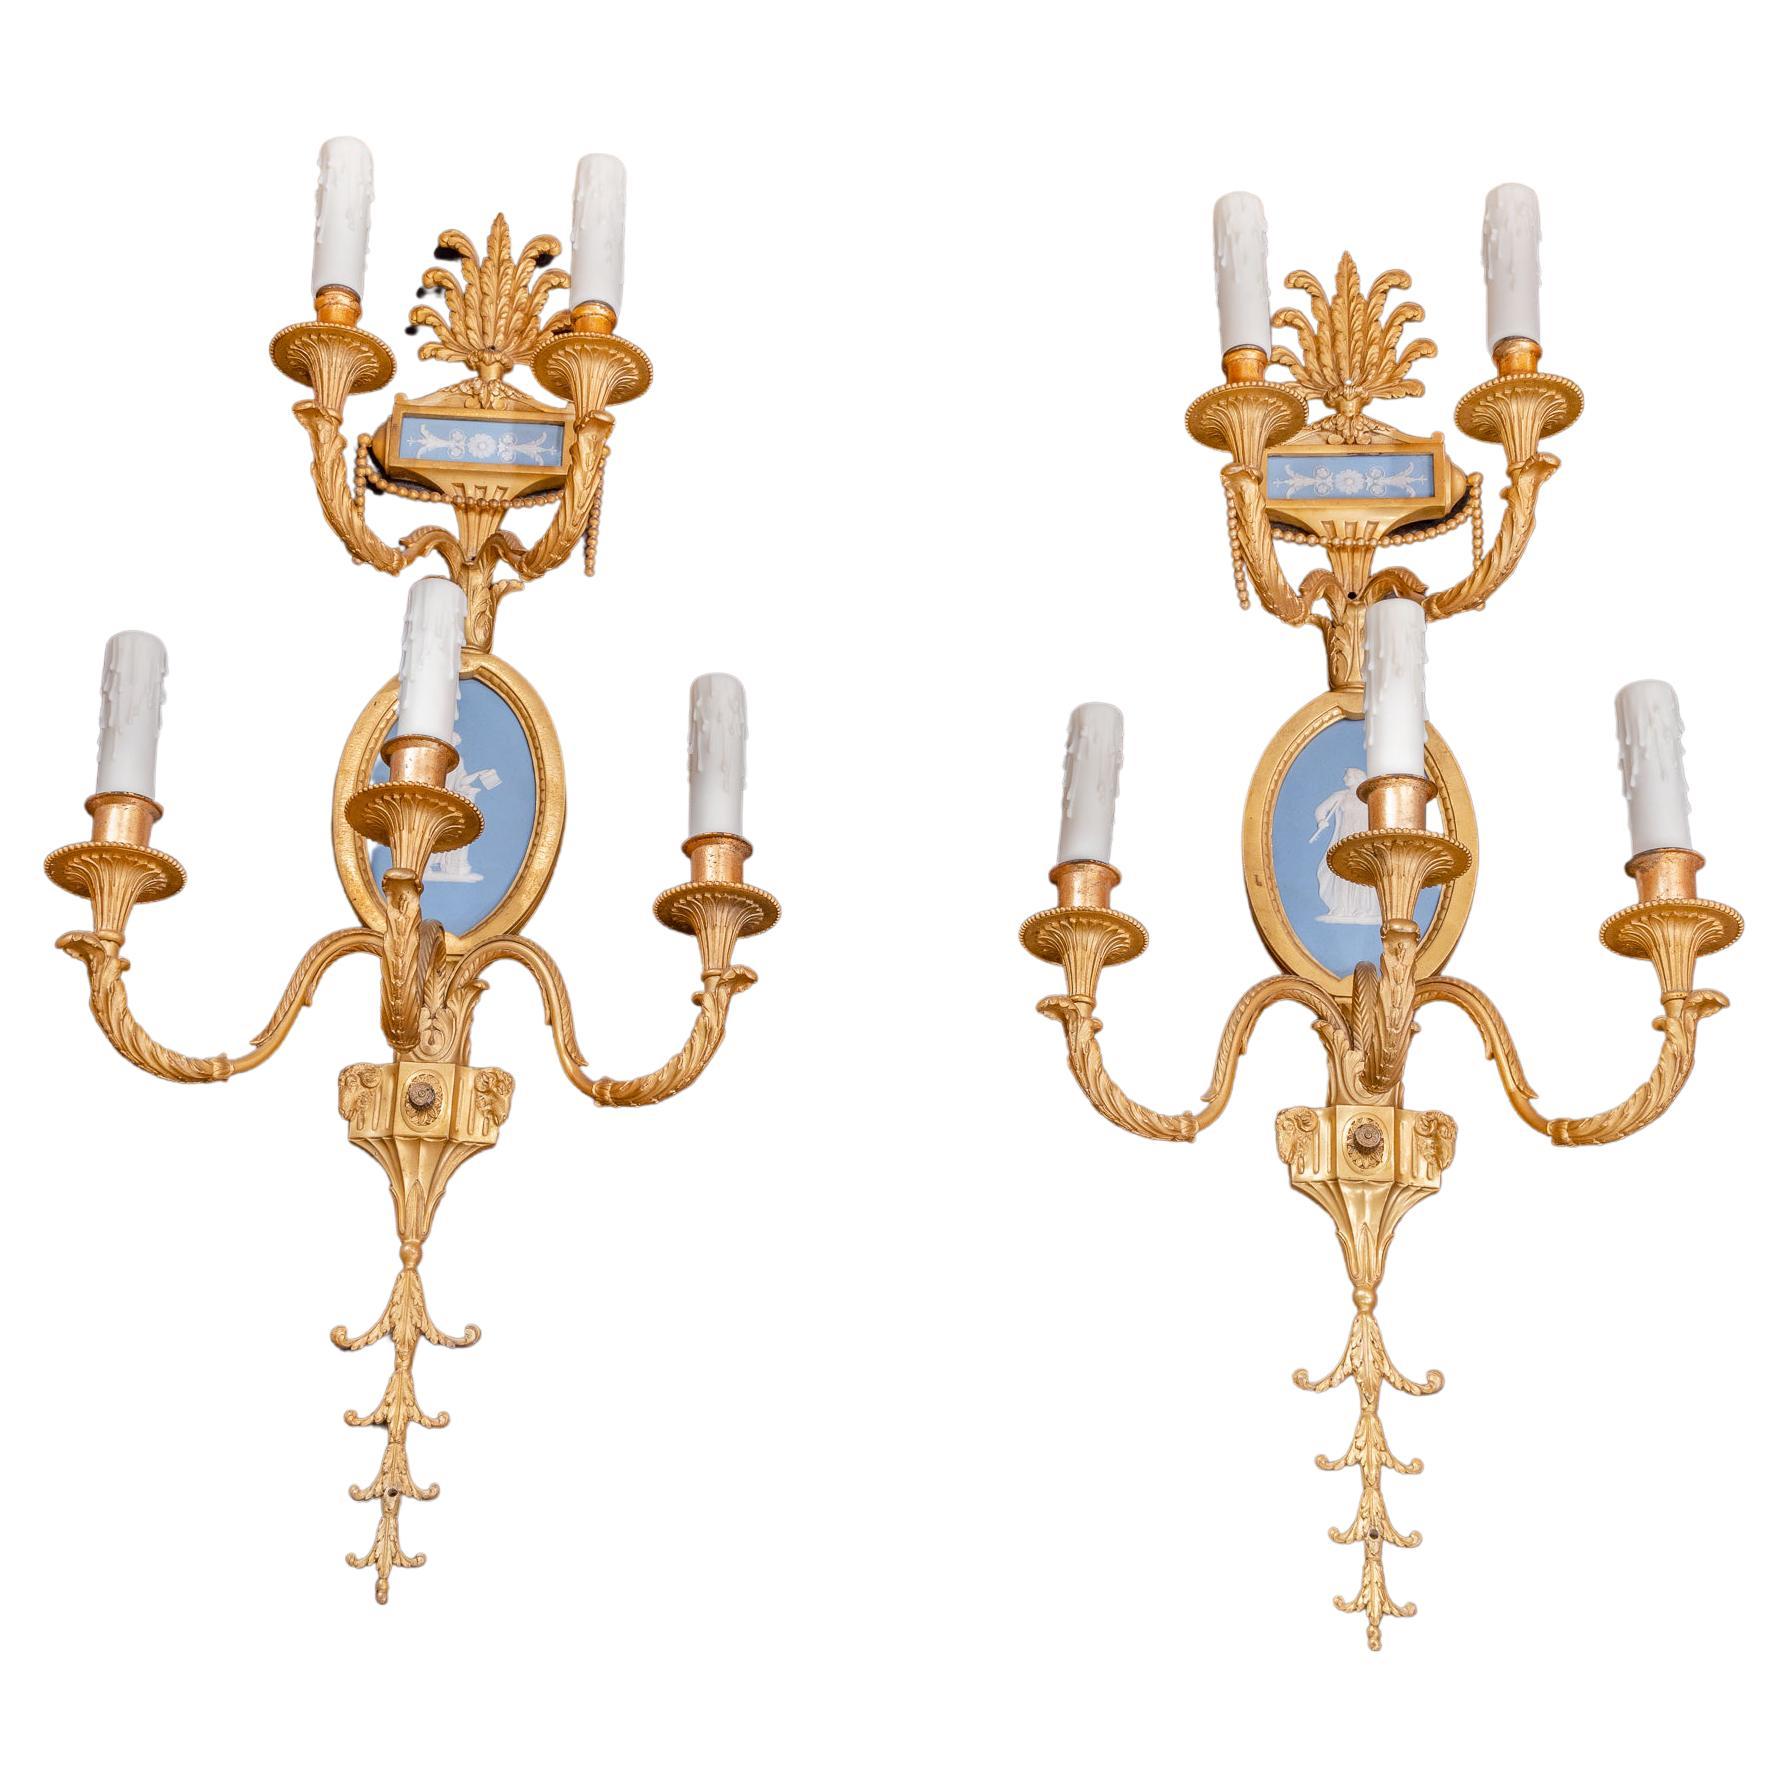 Very Fine Pair of 19th C French Louis XVI Gilt Bronze and Wedgewood Sconces For Sale